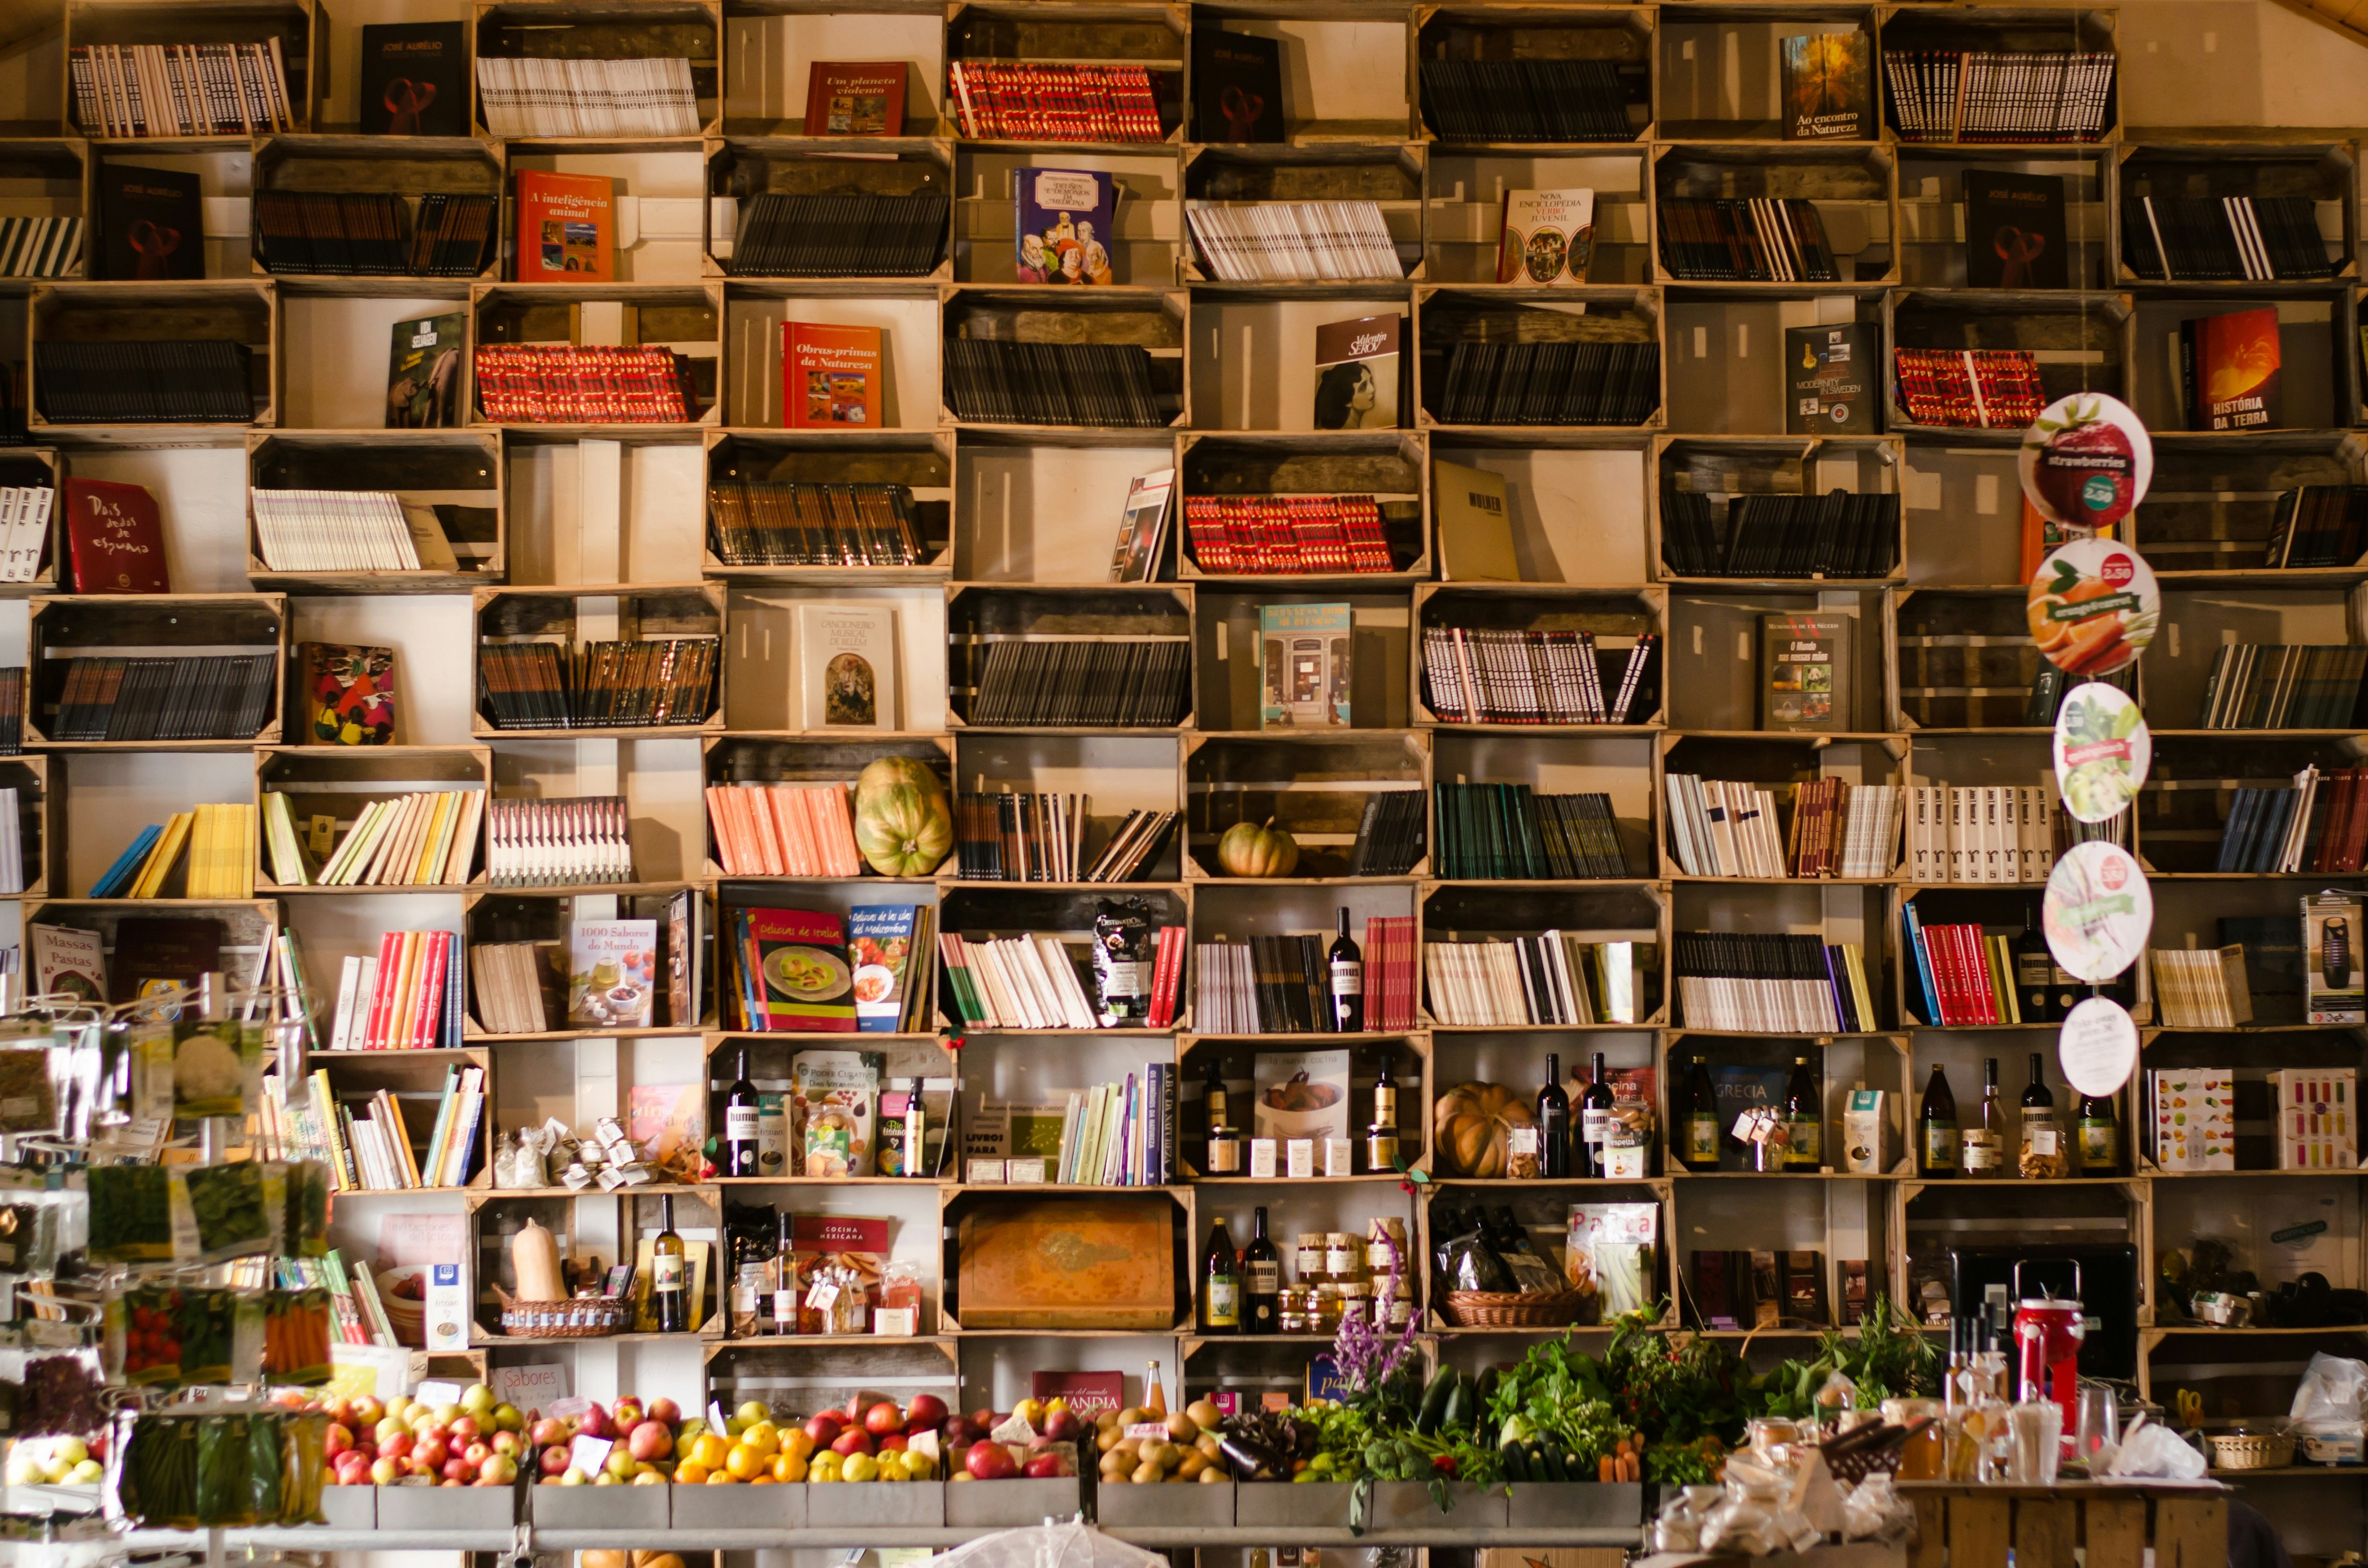 A wall of compartmentalised bookshelves is filled with books; some shelves also have wine bottles and fresh squashes. A table of inviting fruit and vegetables sits underneath the books.